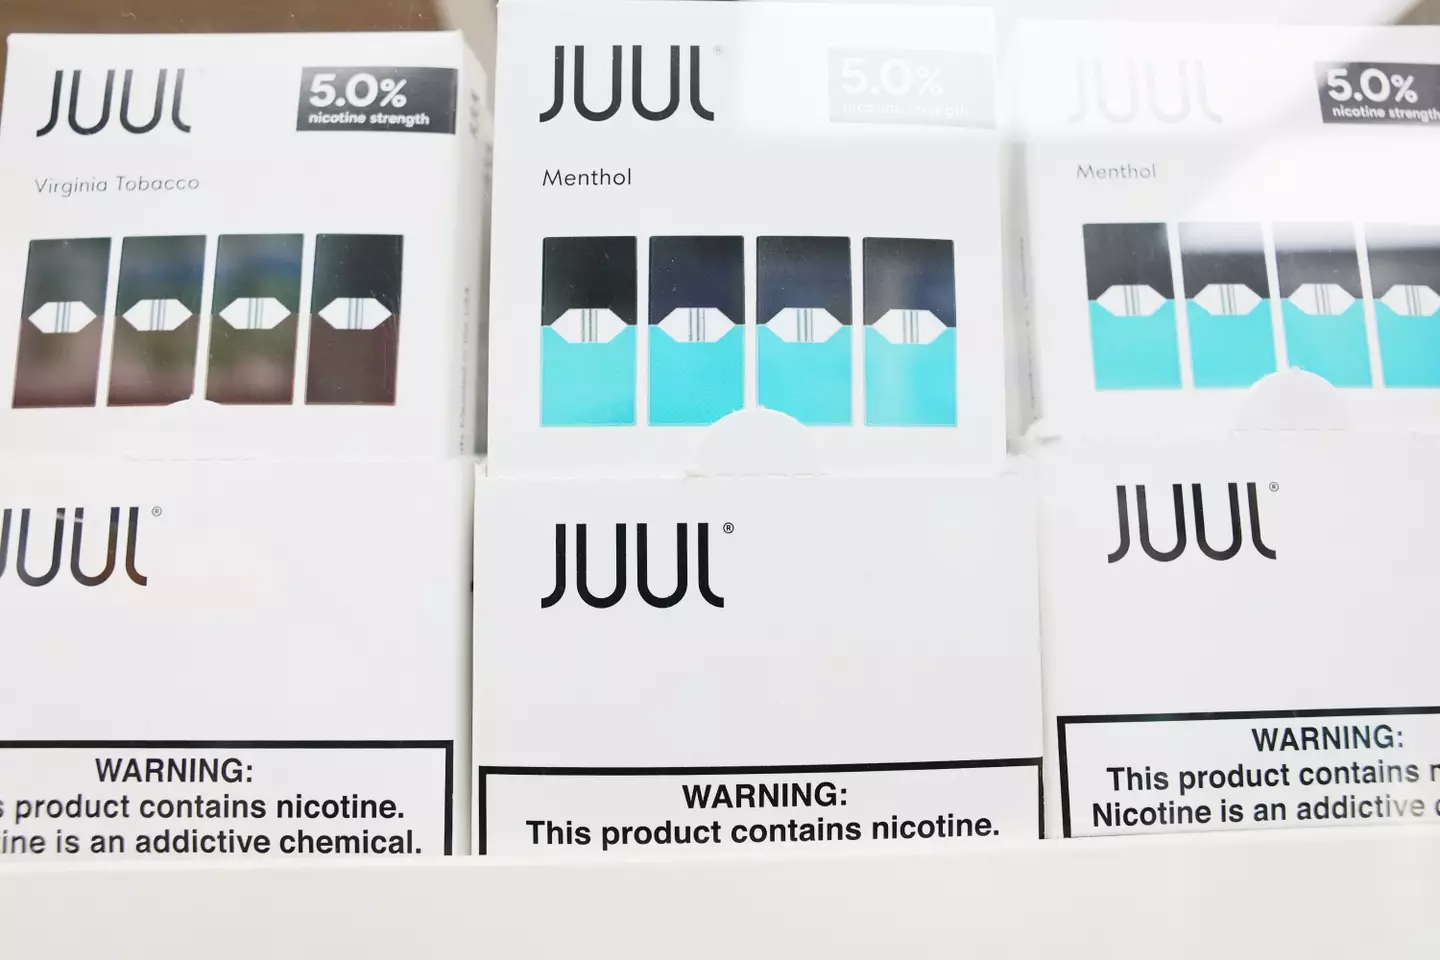 Juul's new product has yet to receive FDA approval.